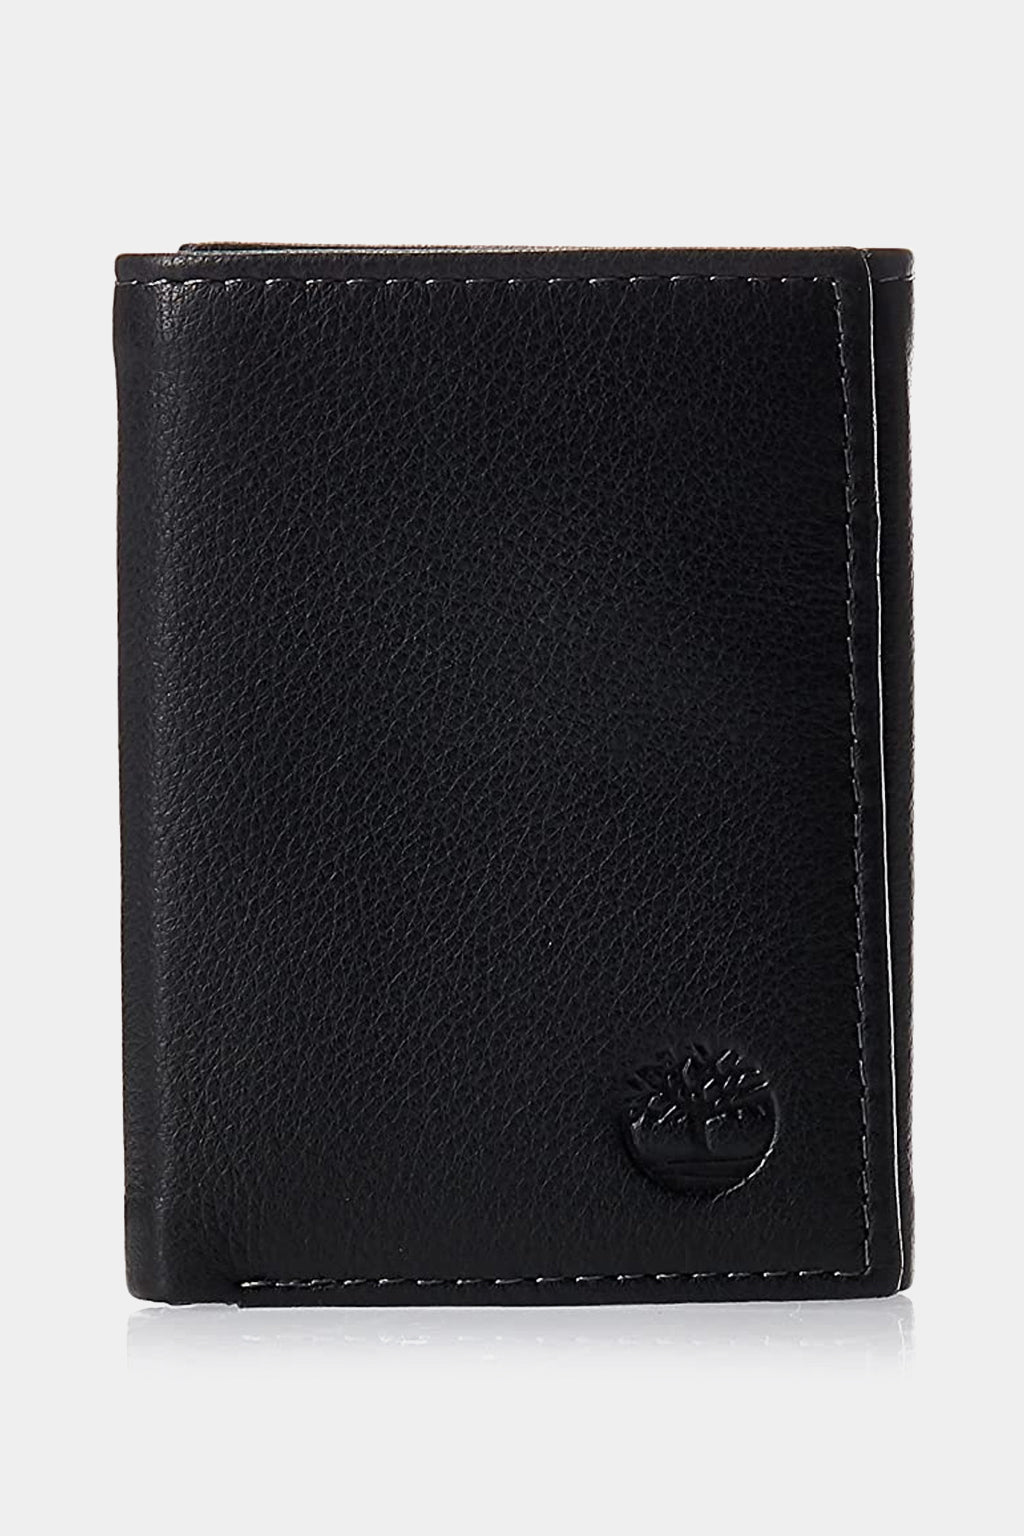 Timberland - Trifold Wallet